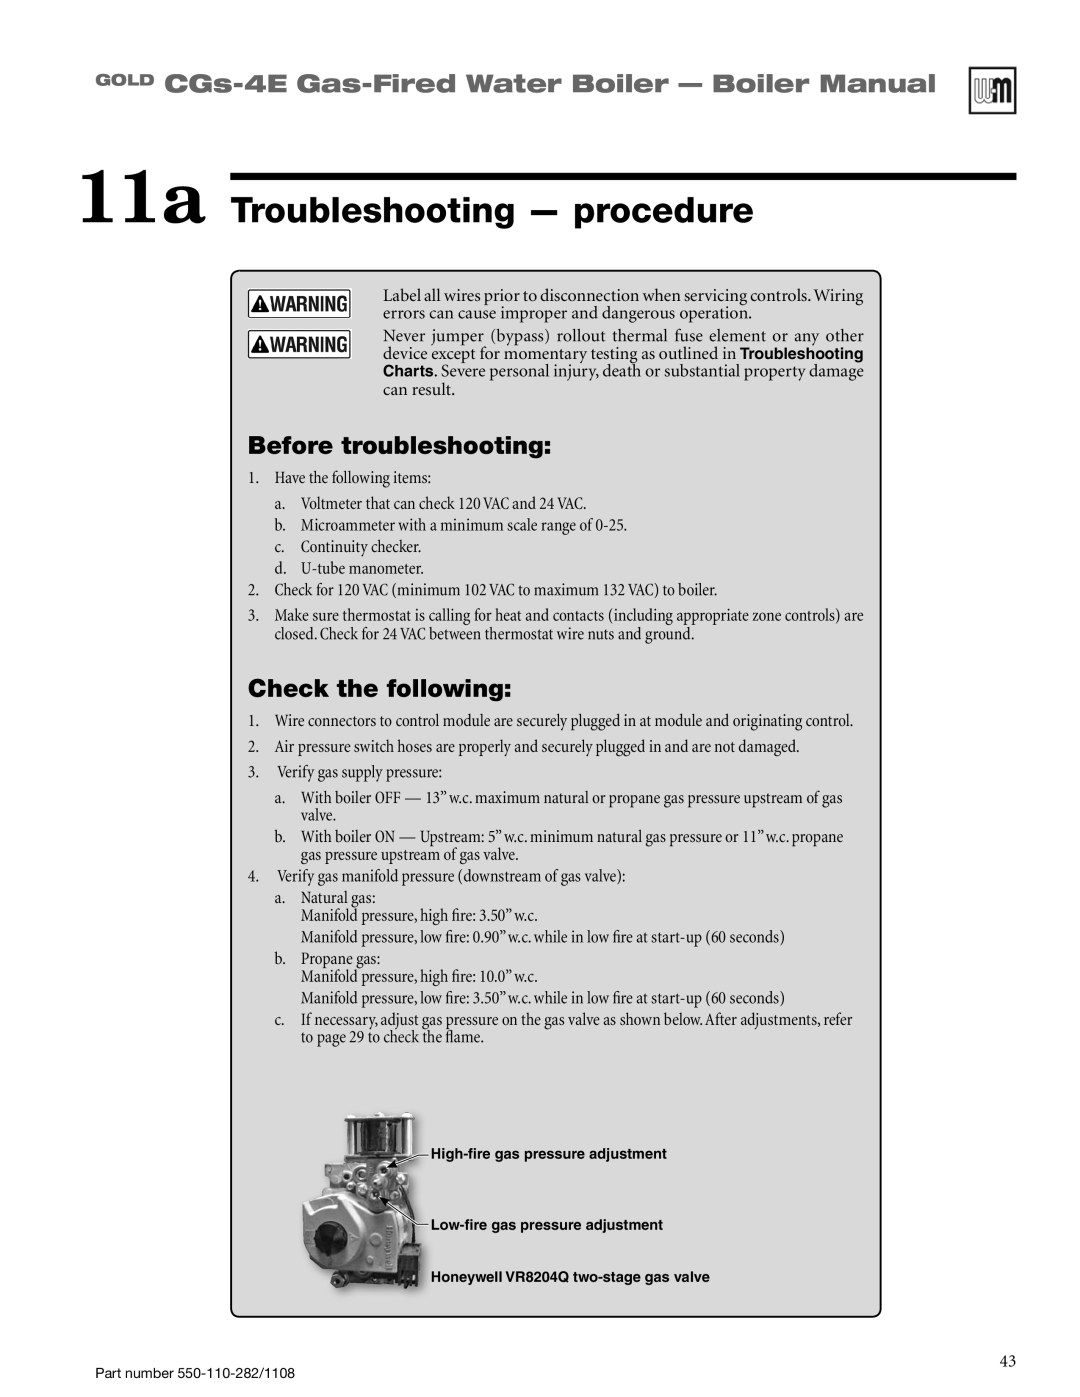 Weil-McLain CGS-4E manual 11a Troubleshooting - procedure, Before troubleshooting, Check the following 